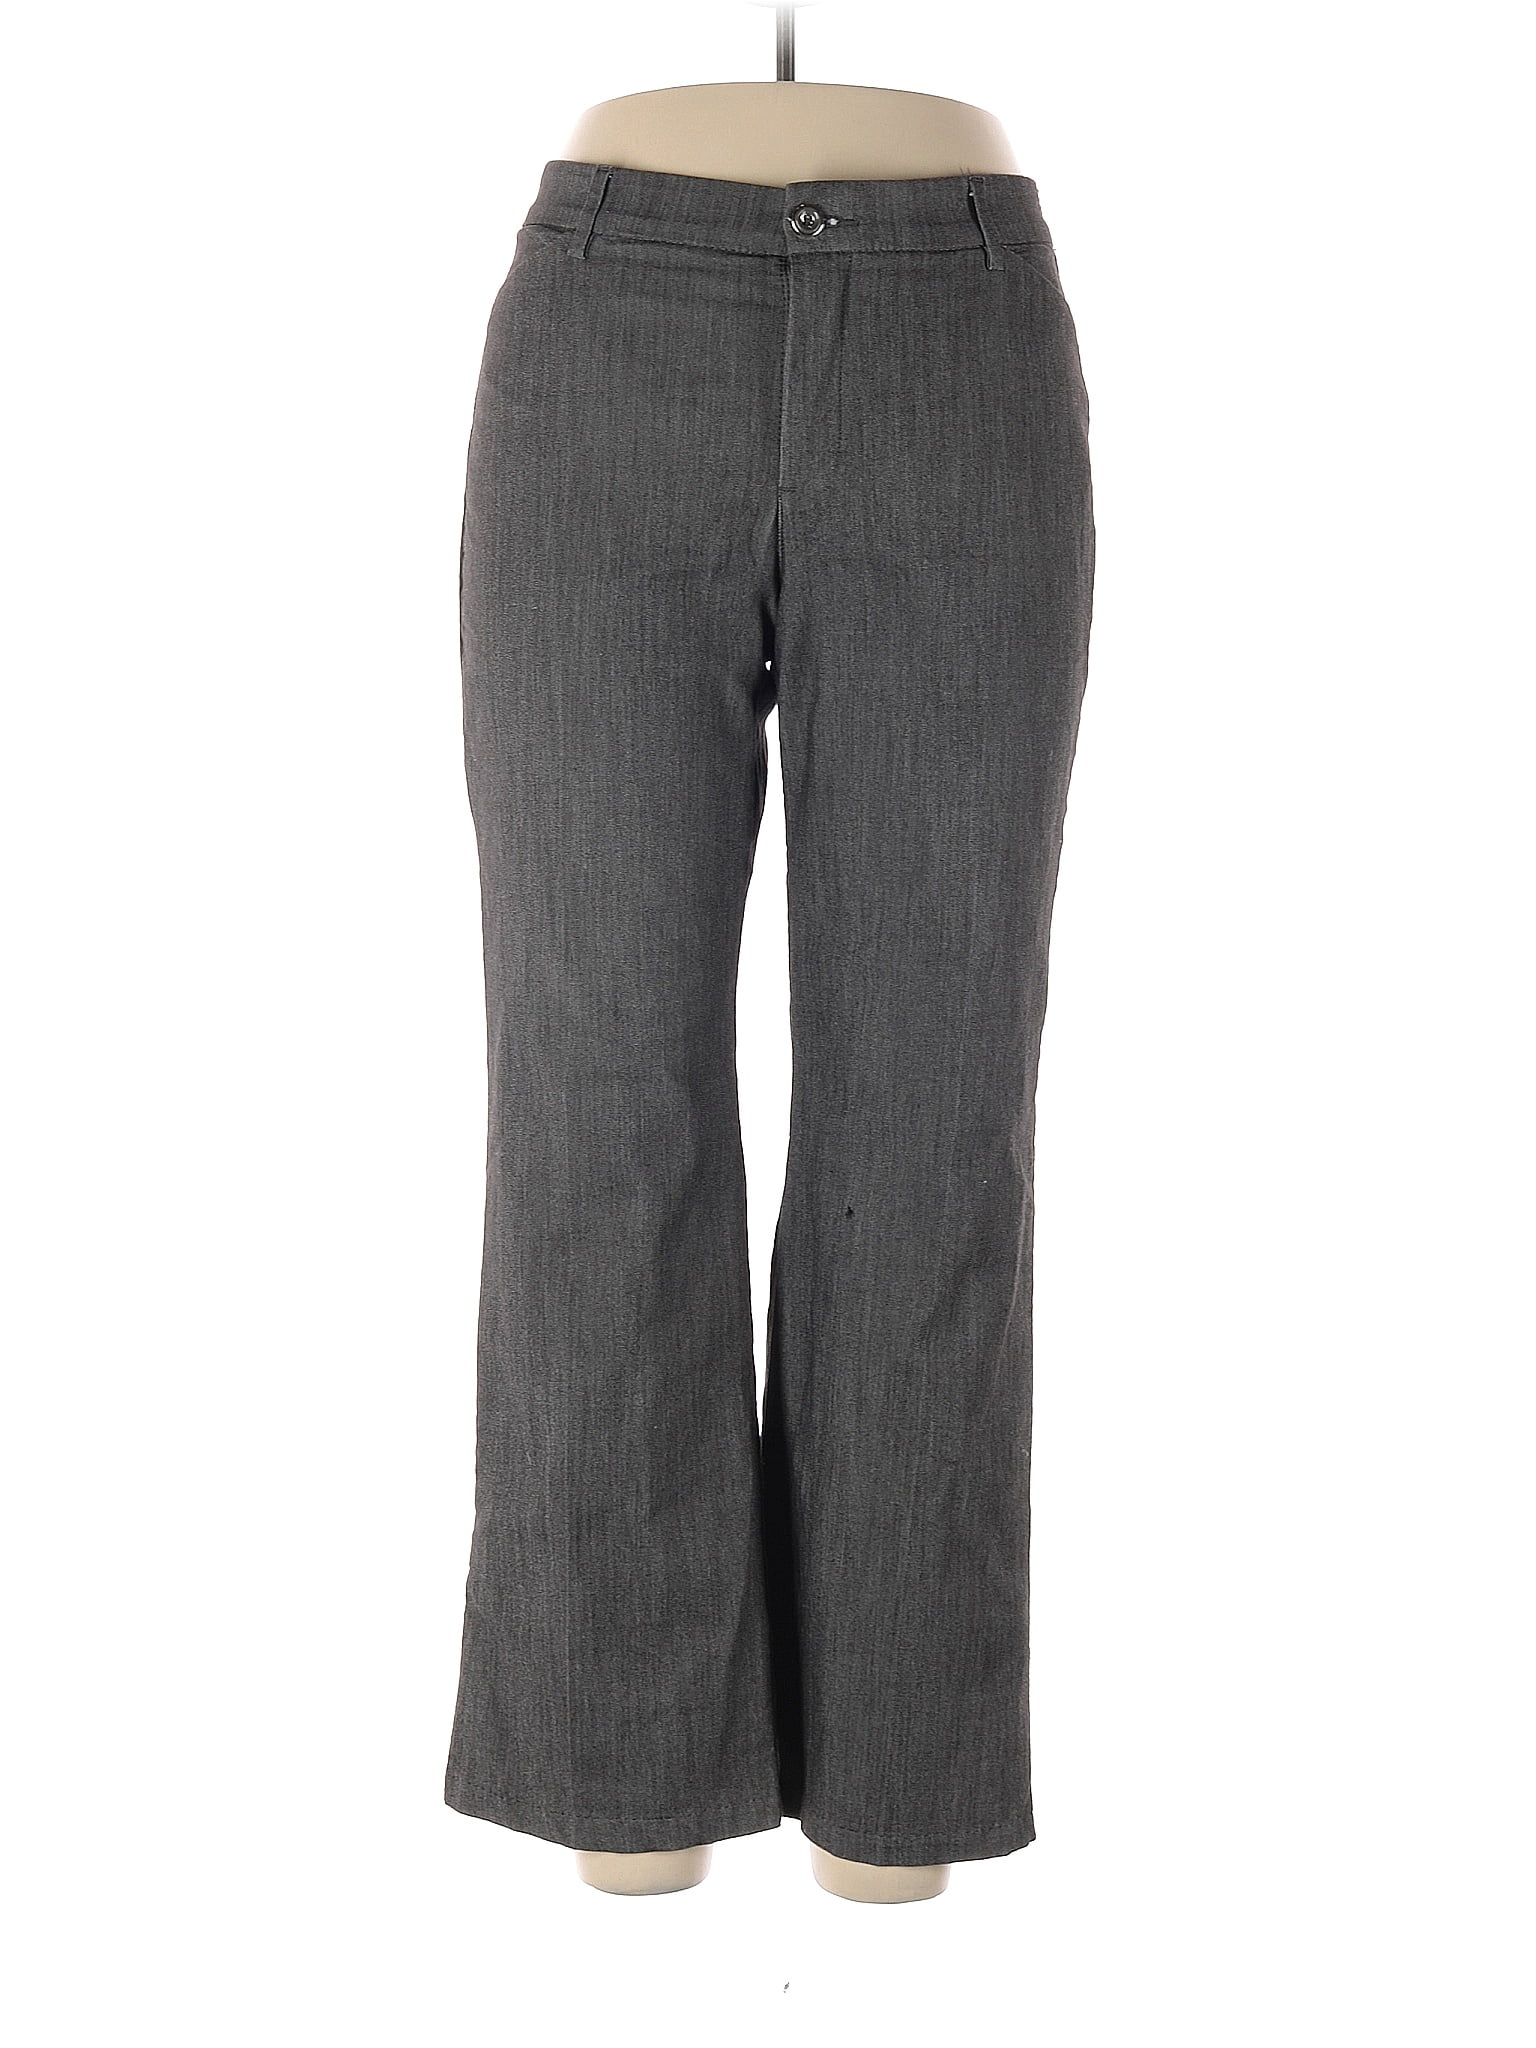 Lee Gray Casual Pants Size 12 - 61% off | thredUP